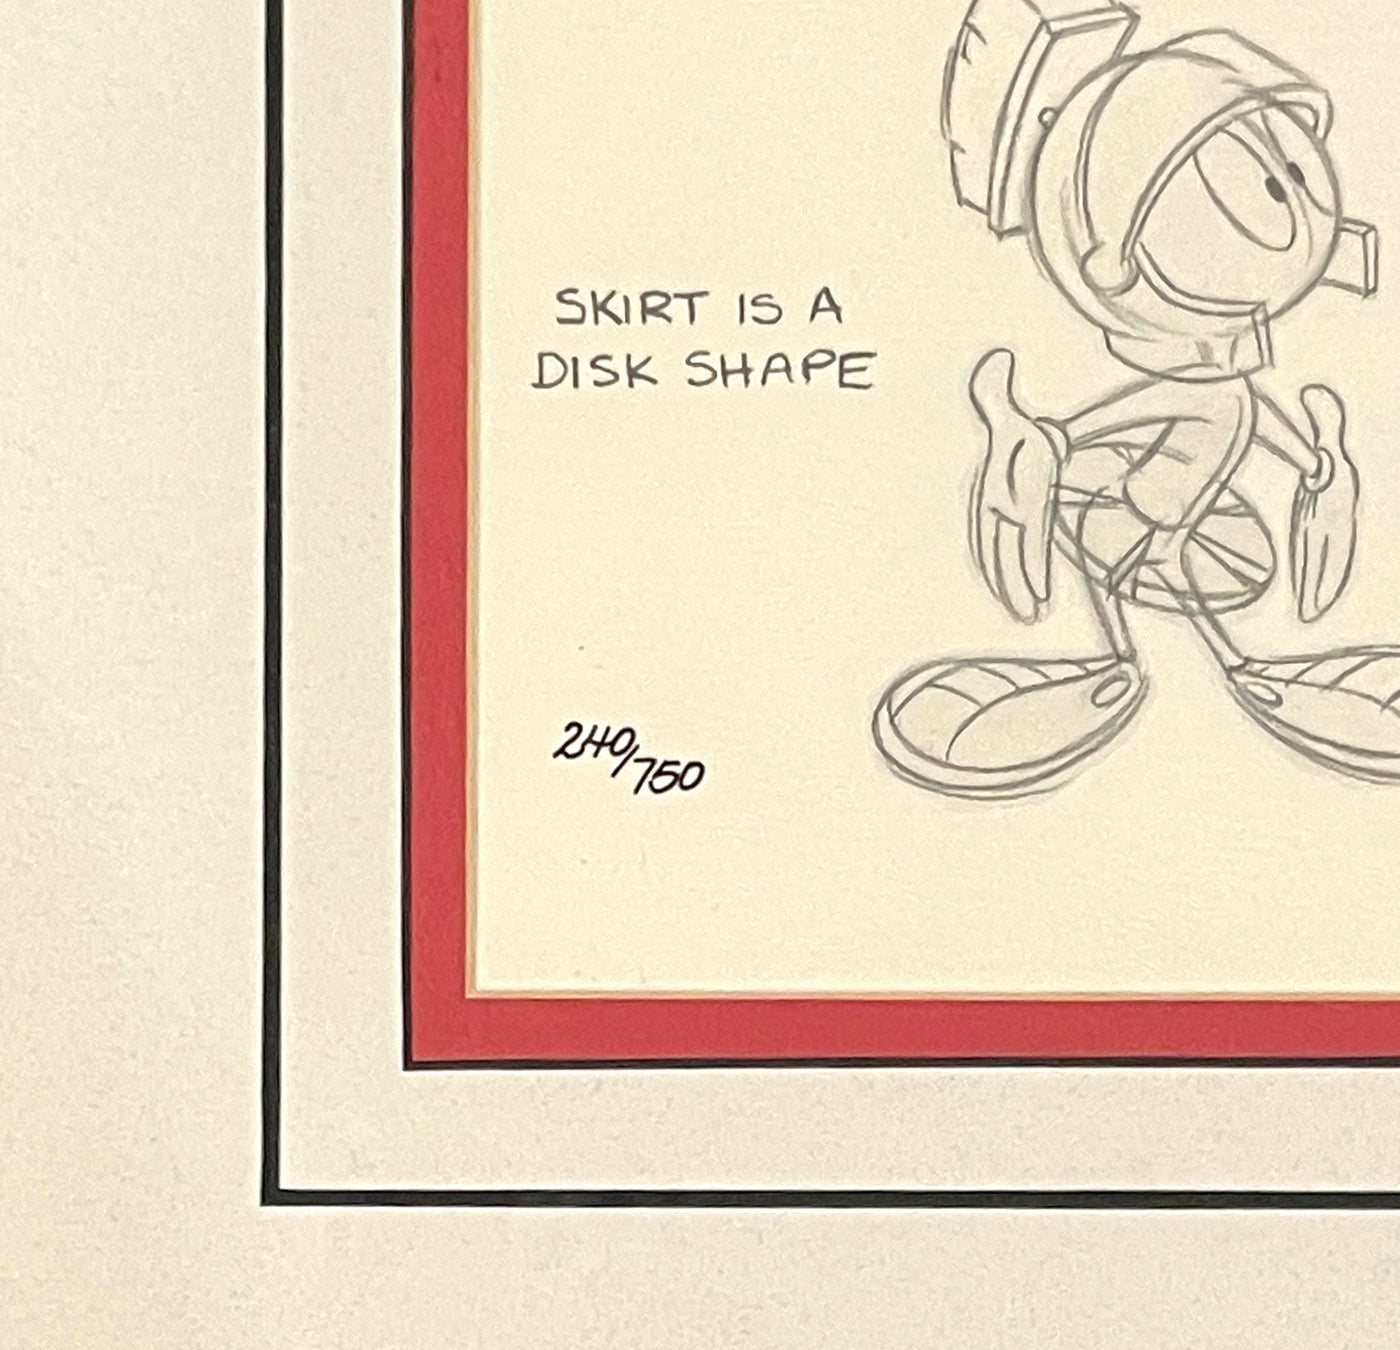 Warner Brothers Limited Edition Model Sheet: Marvin the Martian